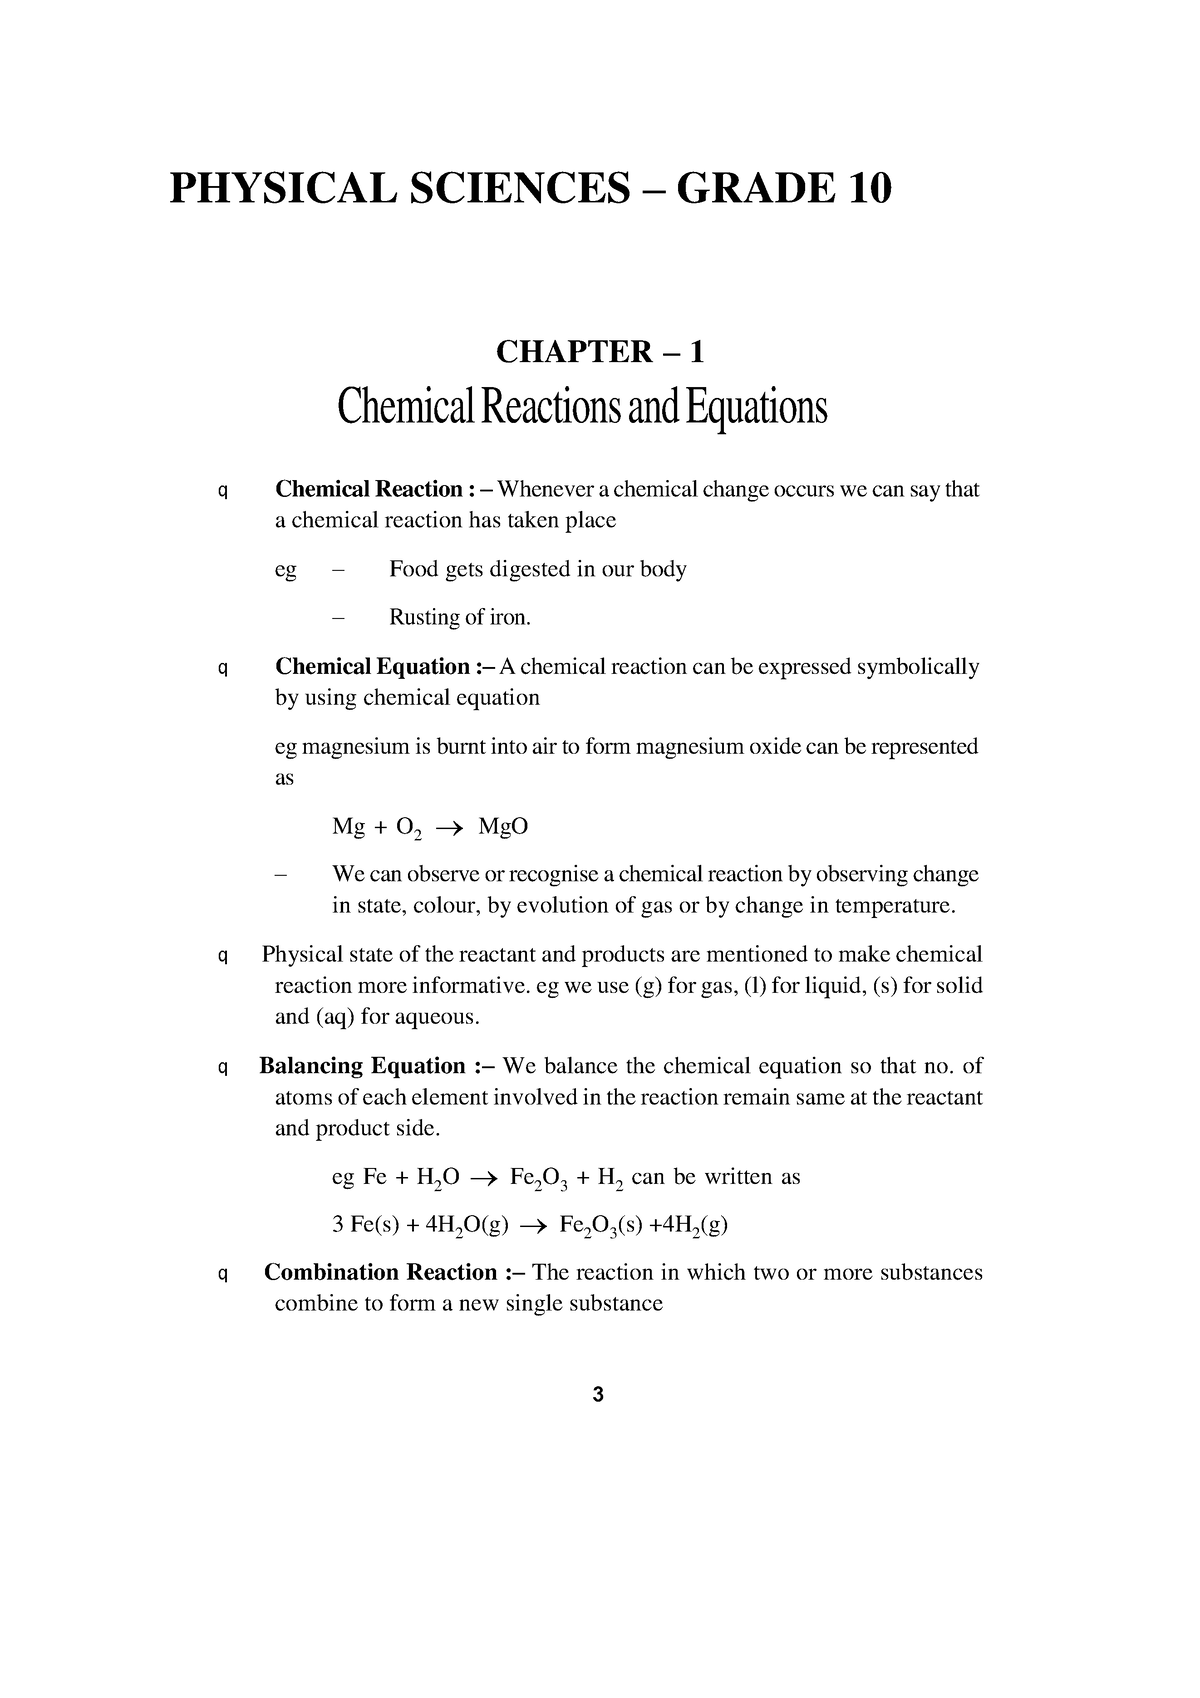 physical-sciences-grade-10-notes-physical-sciences-grade-10-chapter